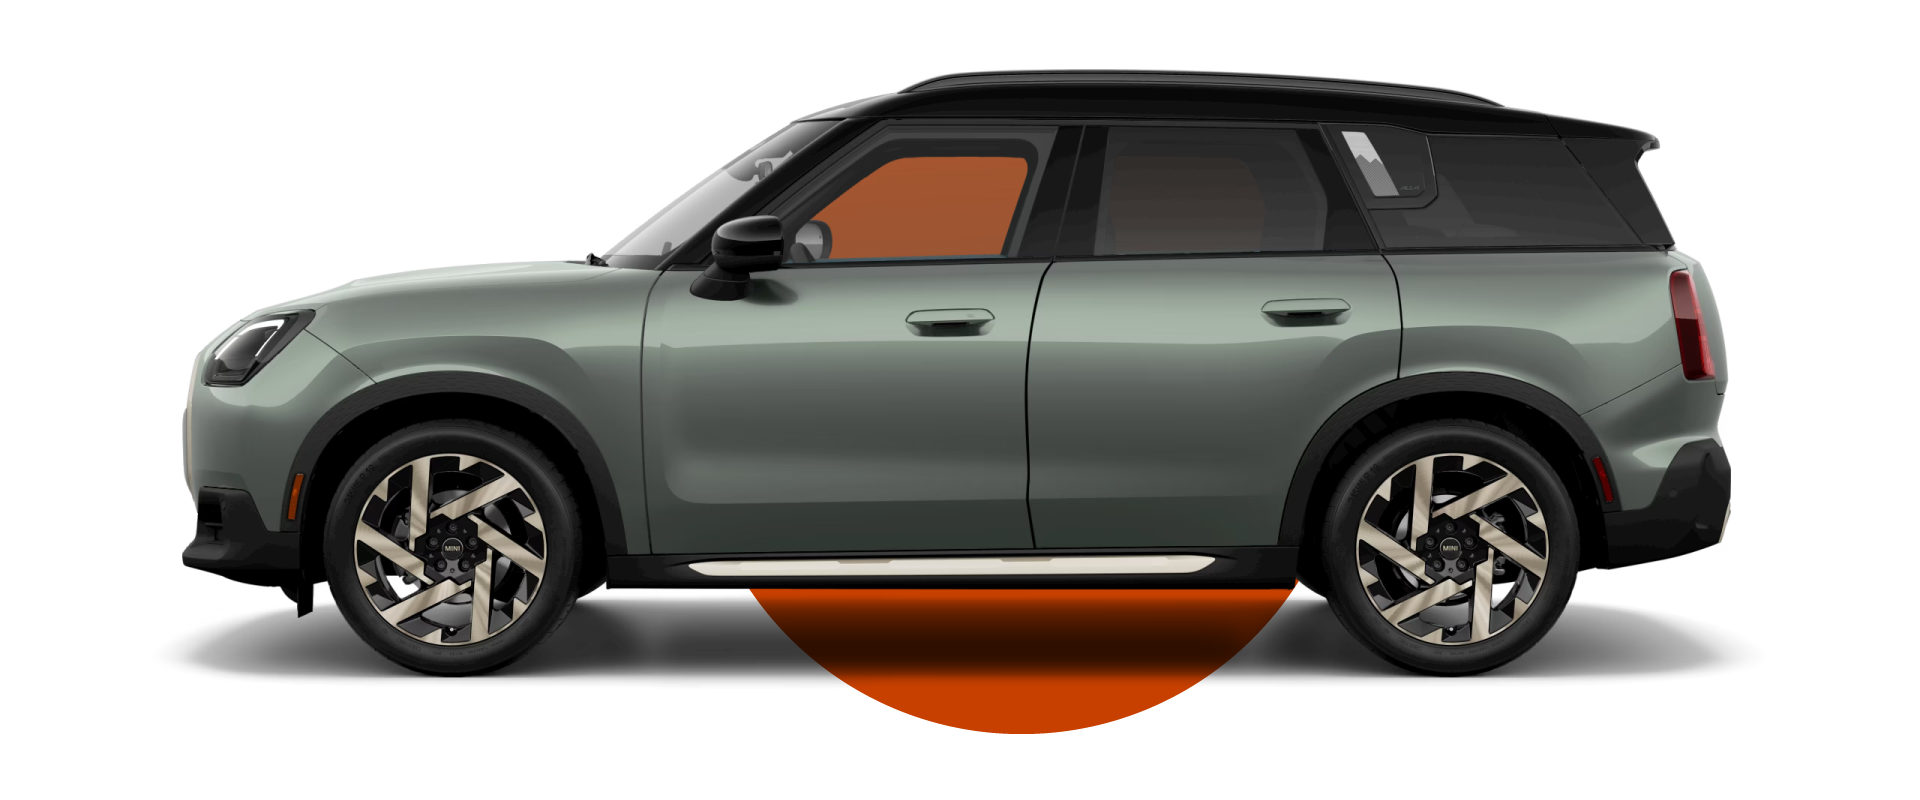 Side view of a MINI Countryman S ALL4 in the Smokey Green body color, facing left with its shadow underneath it